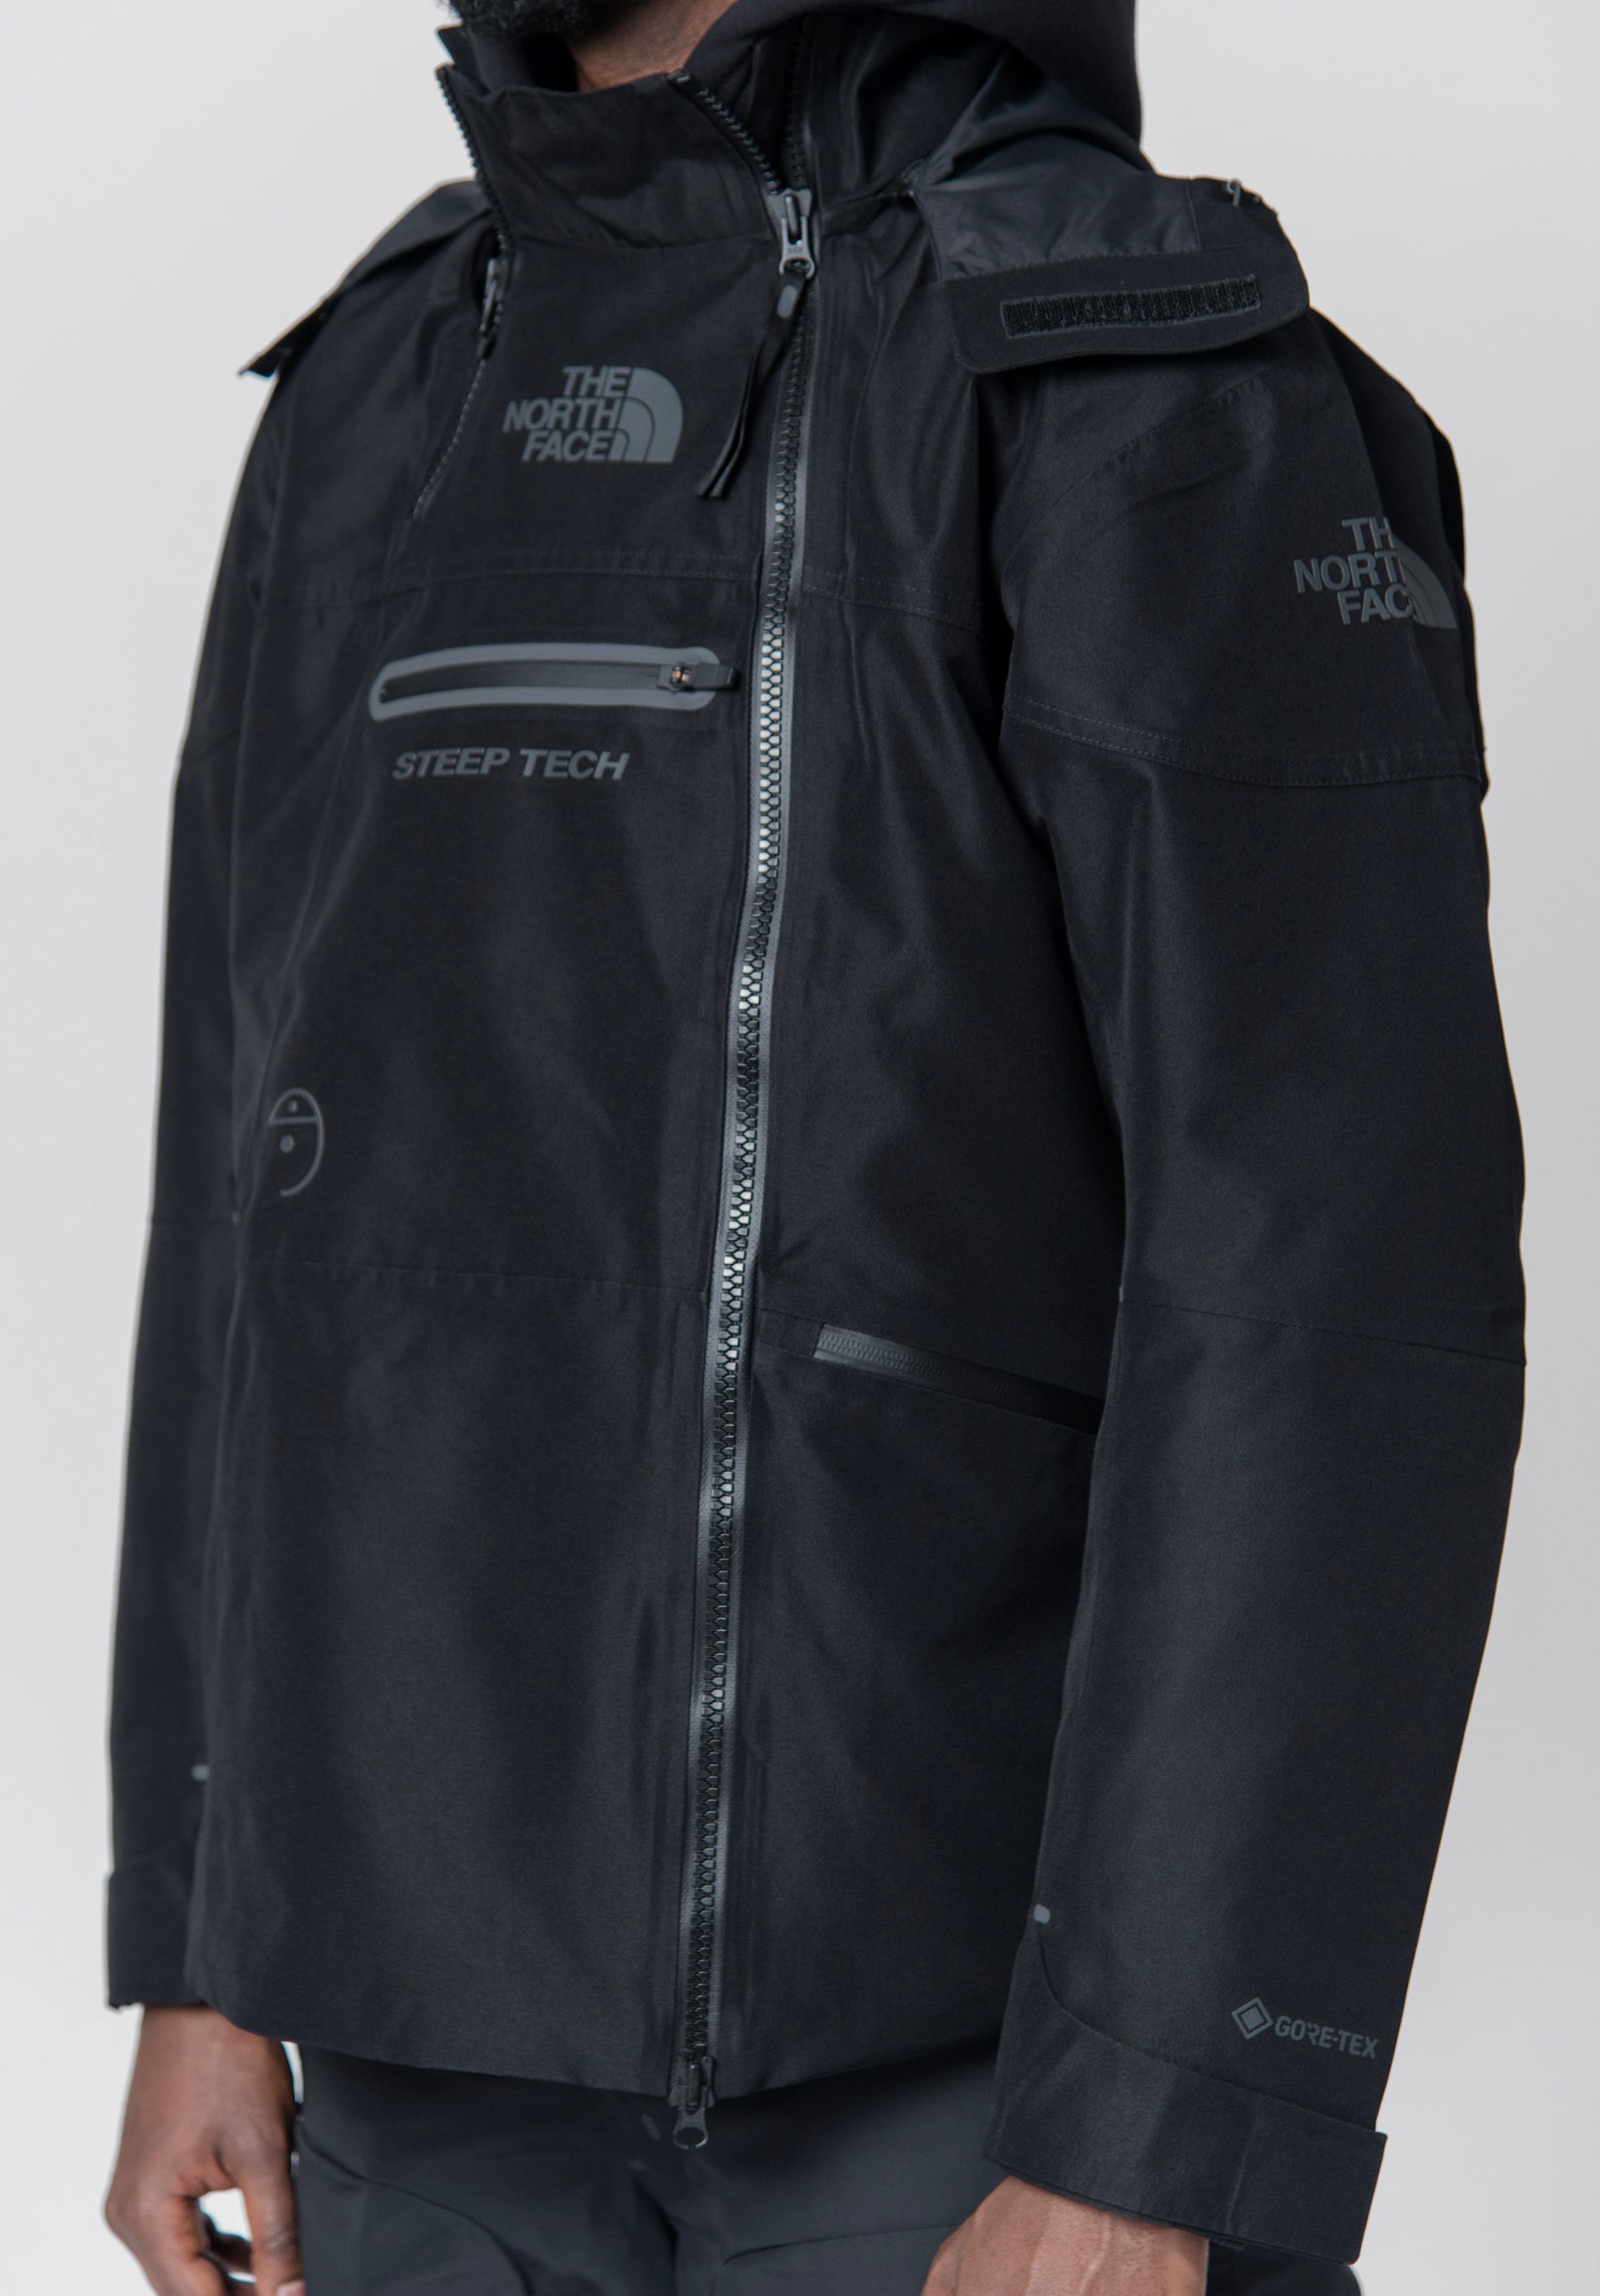 The North Face RMST Steep Tech Gore-Tex Work Jacket Black